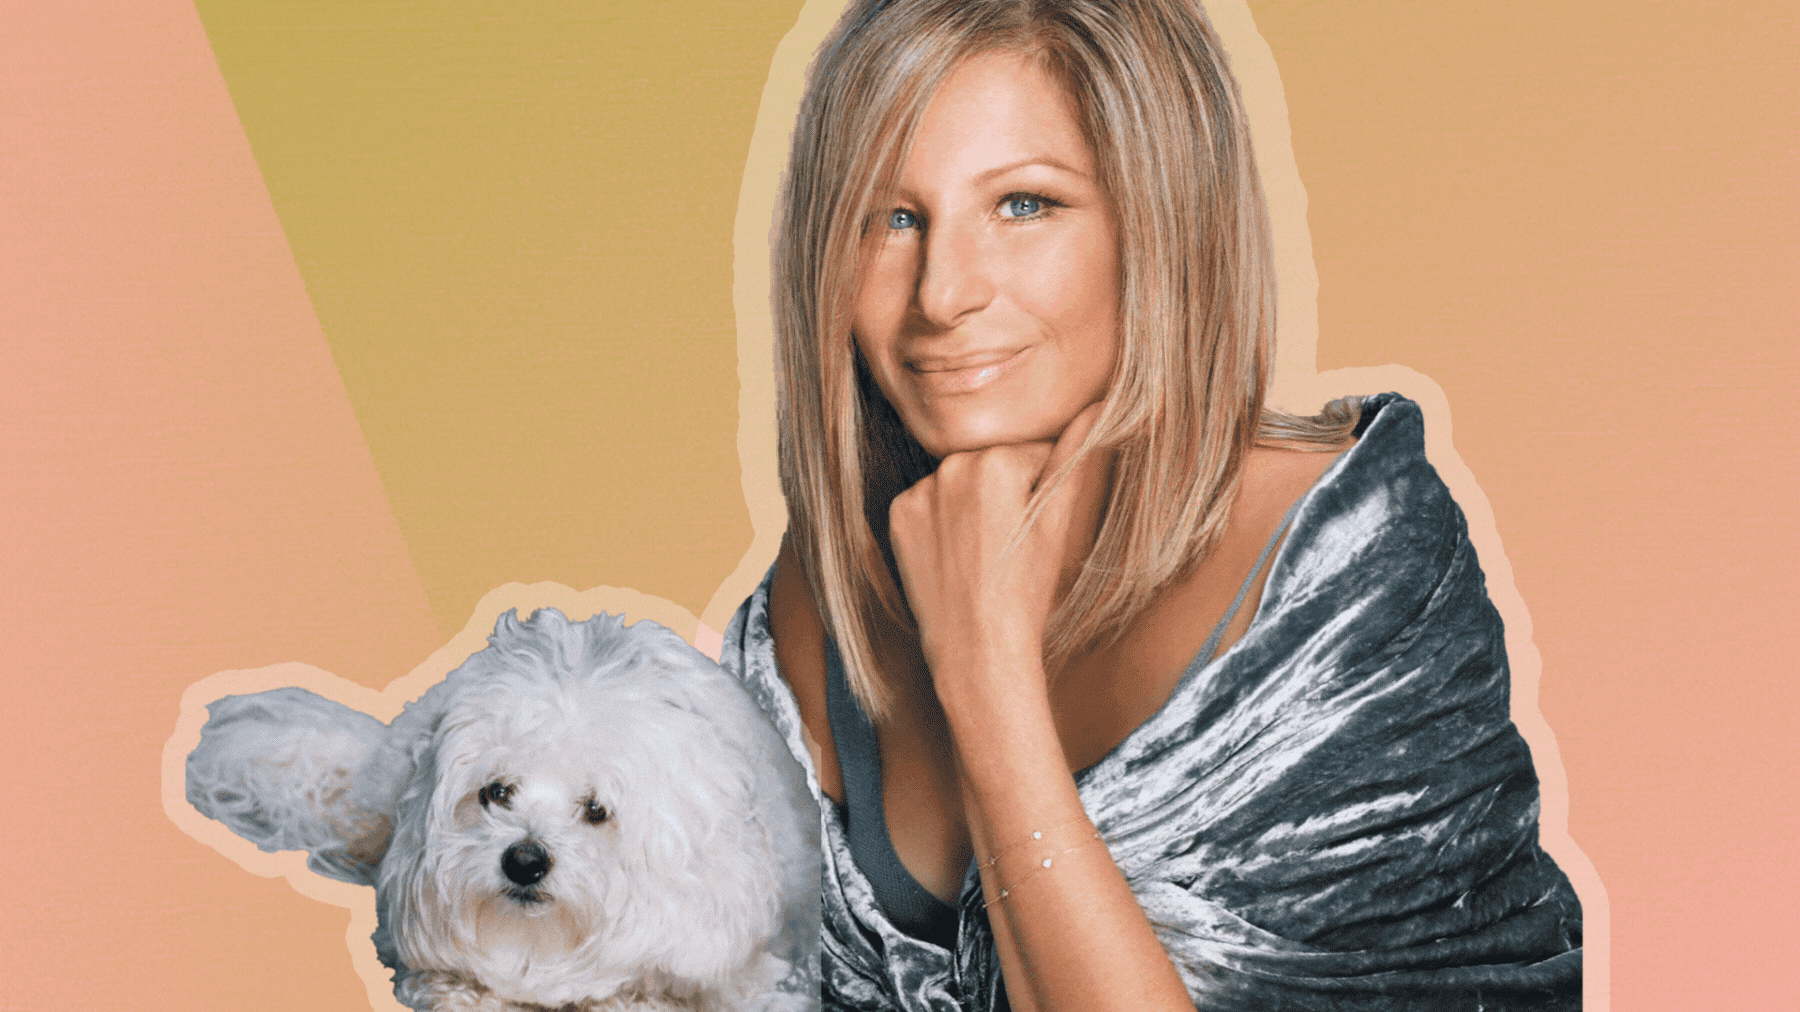 How Barbra Streisand’s design statement inspired a hit play – The Forward